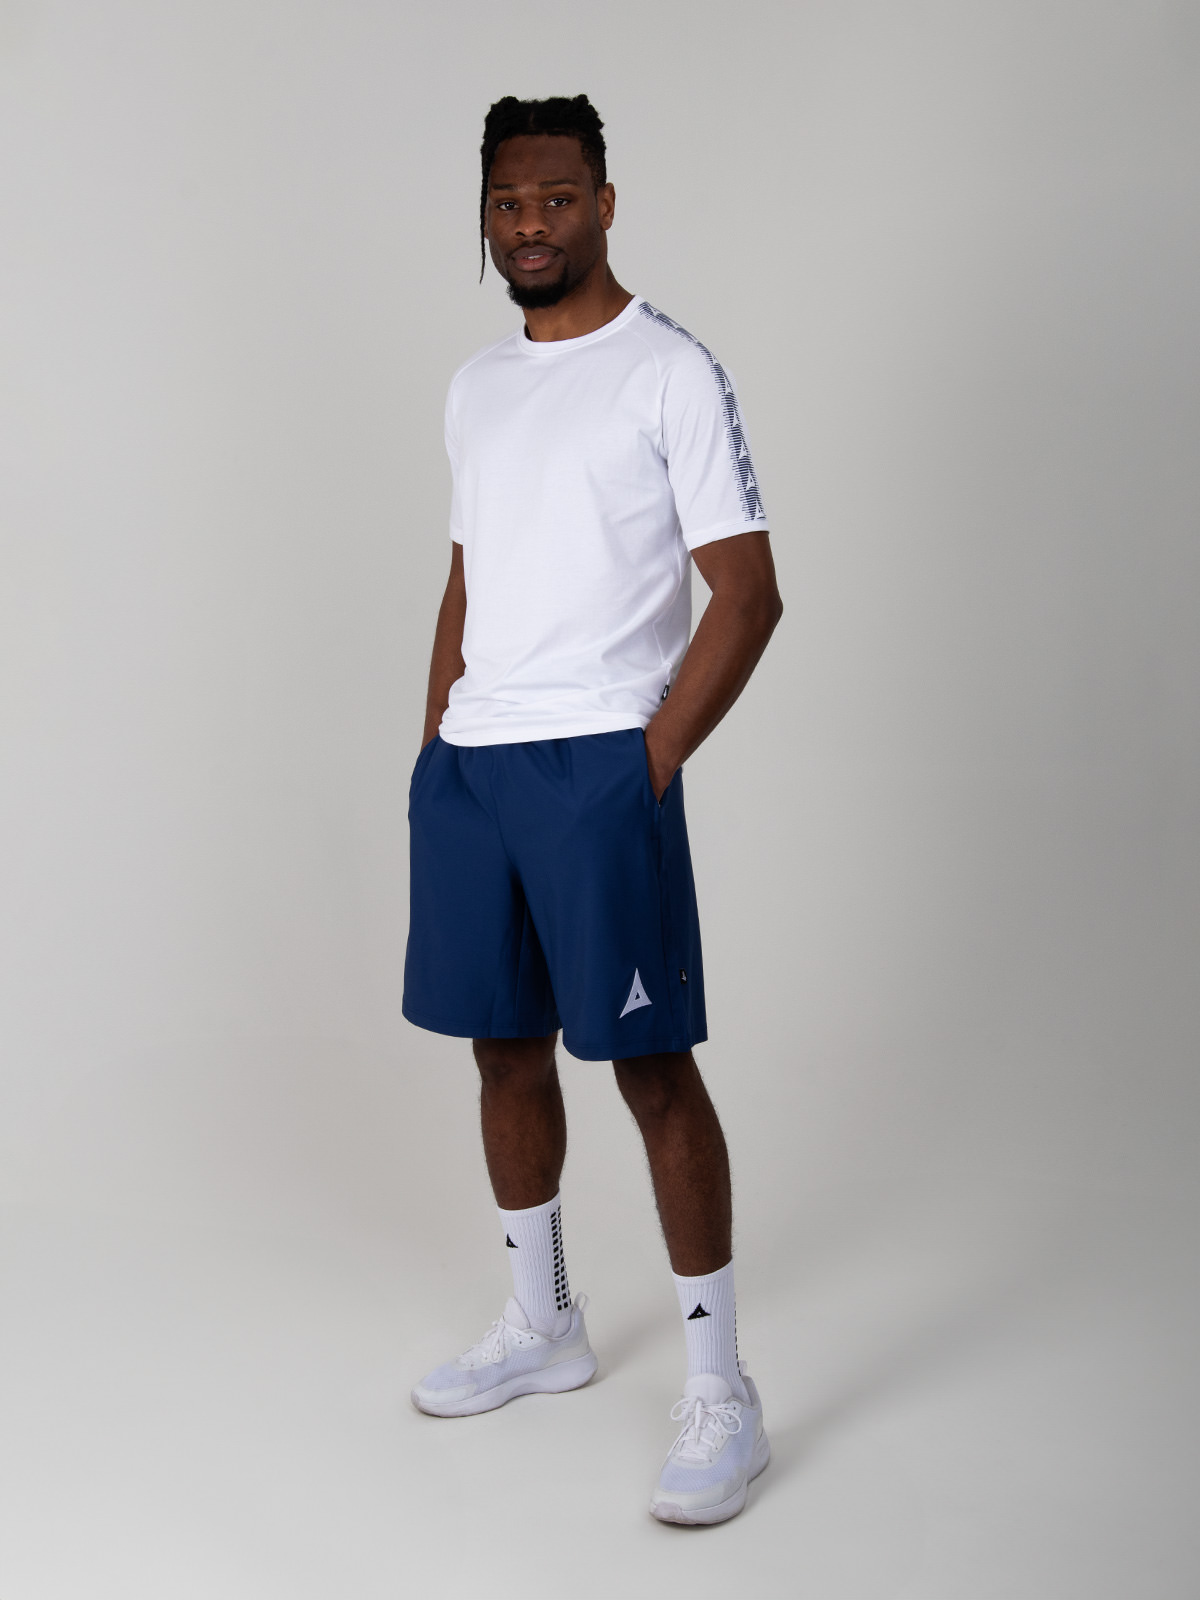 model standing up wearing a plain white cotton t-shirt with avec logo taping print on sleeves, navy blue coaching shorts and white grip socks